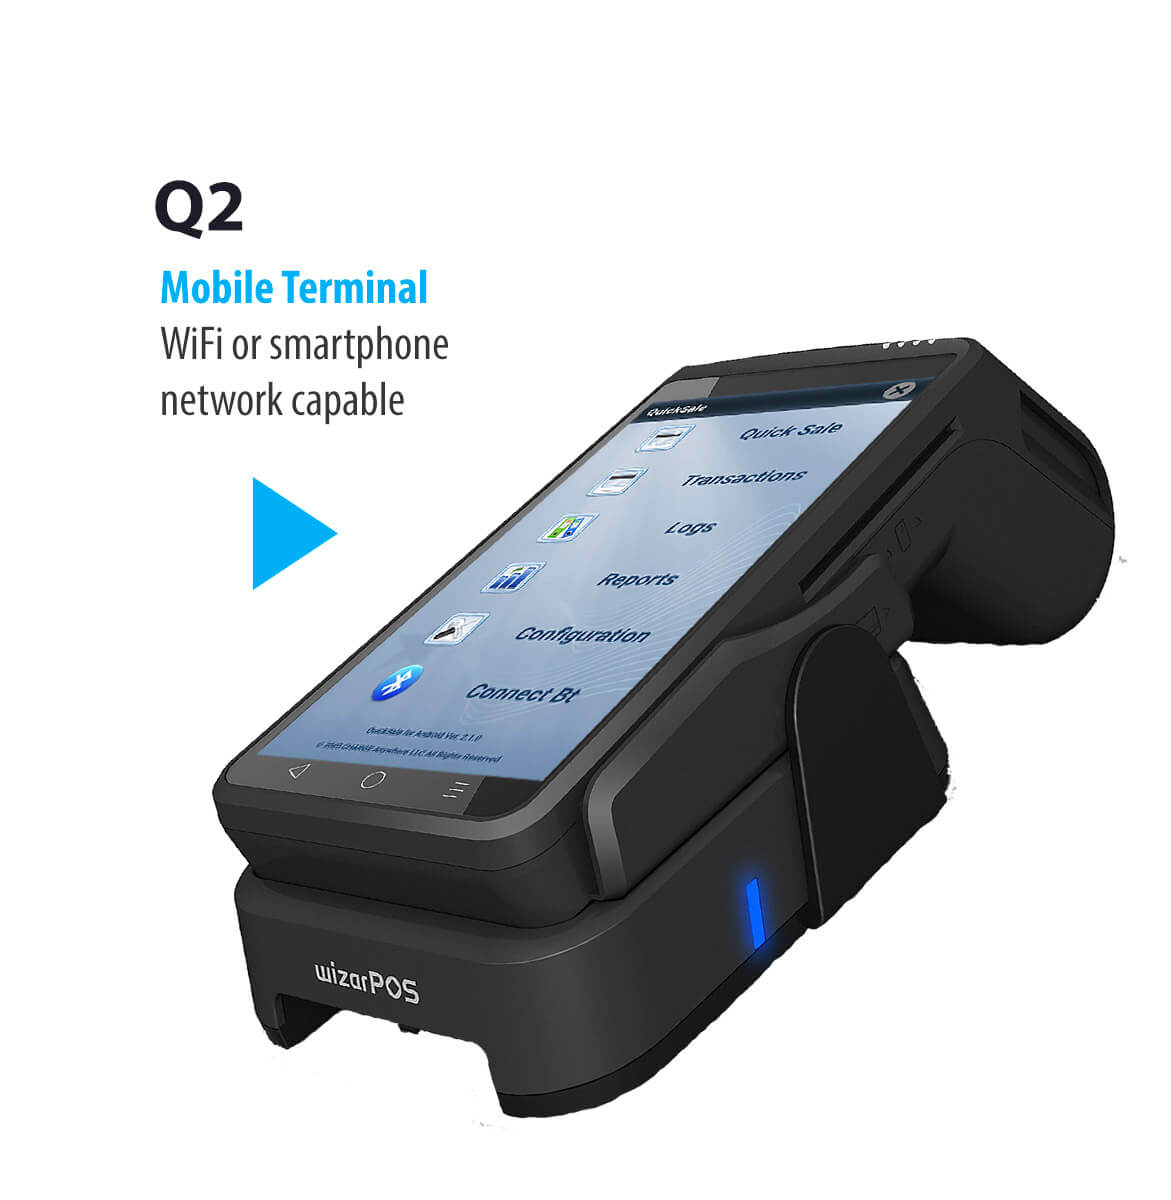 Q2 Mobile terminal wifi or smartphone network capable